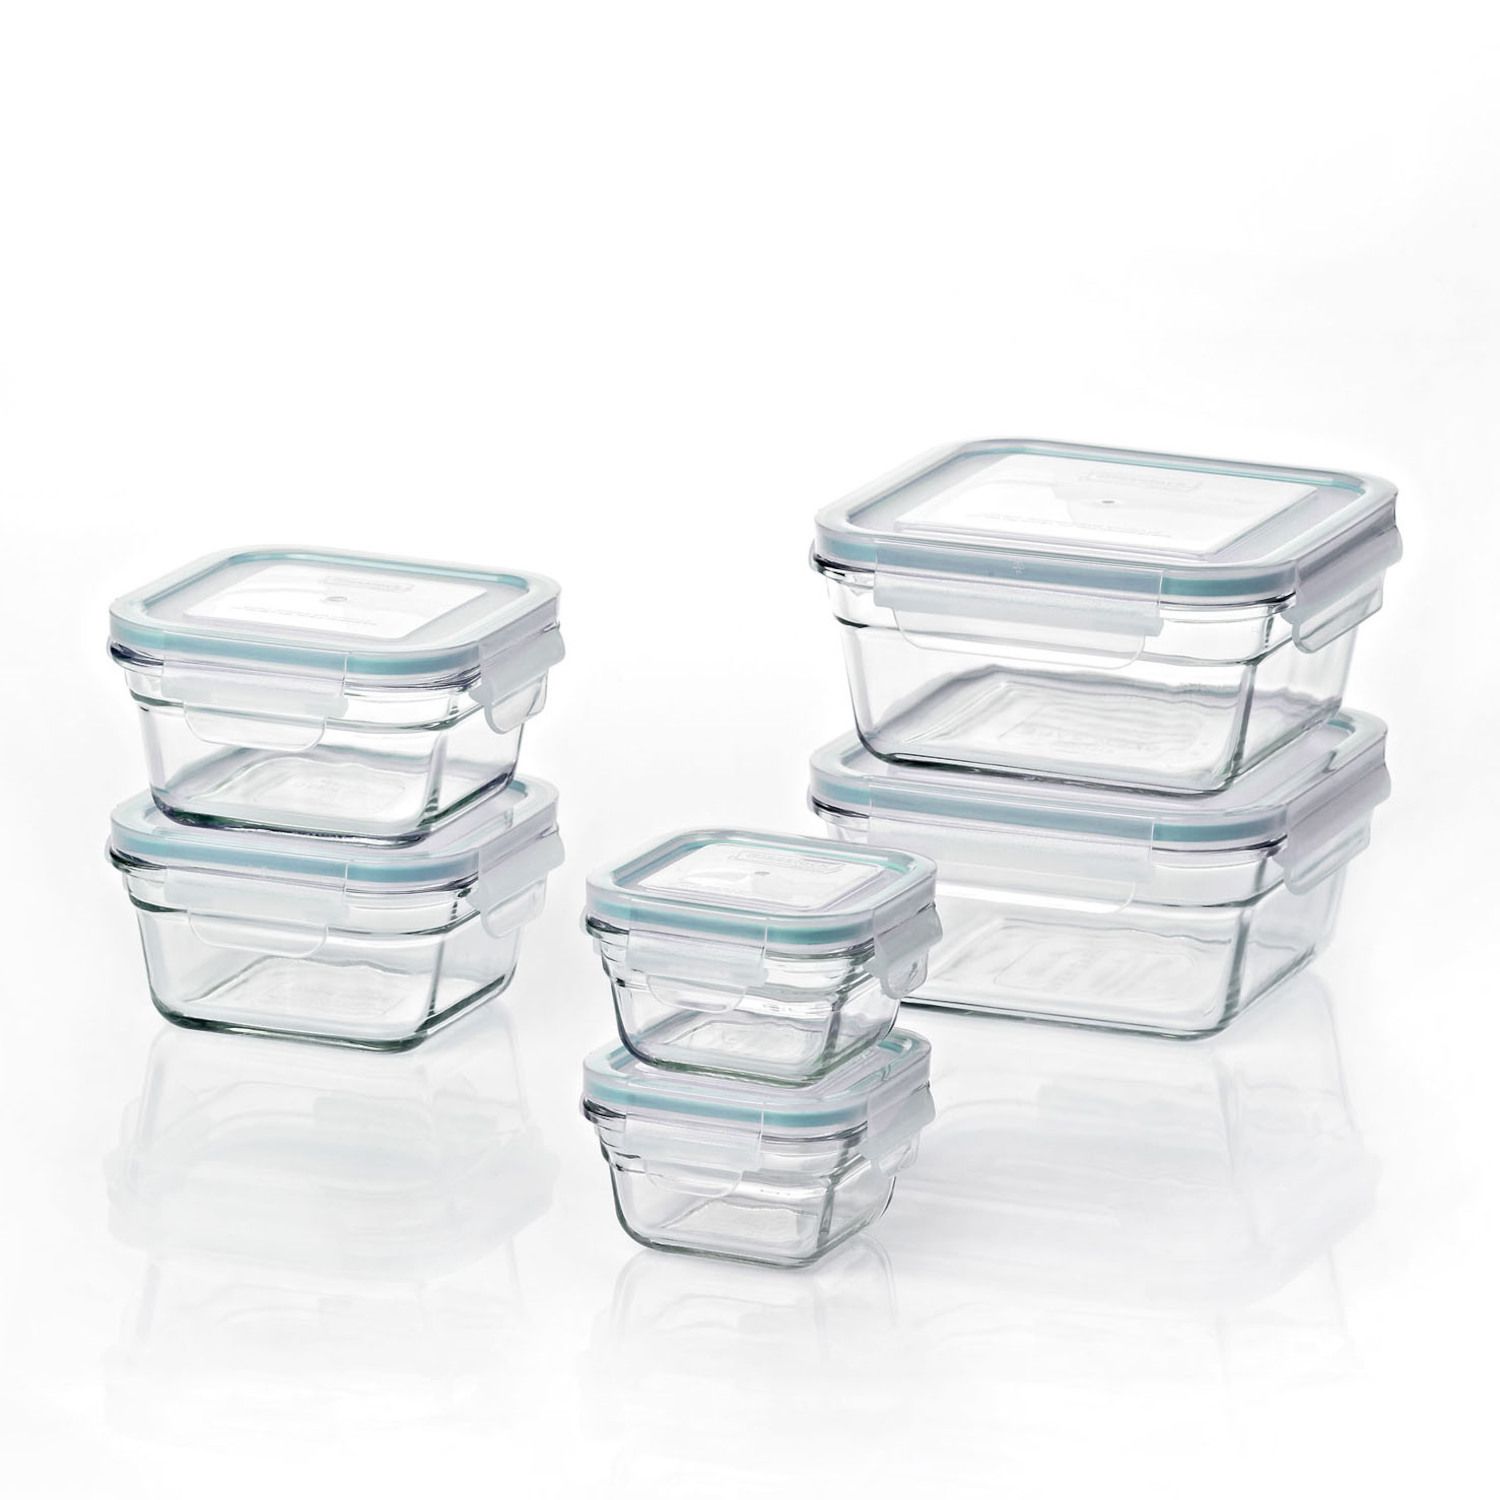 JoyJolt 24 Piece Fluted Glass Food Storage Containers with Leakproof Lids Set - Black